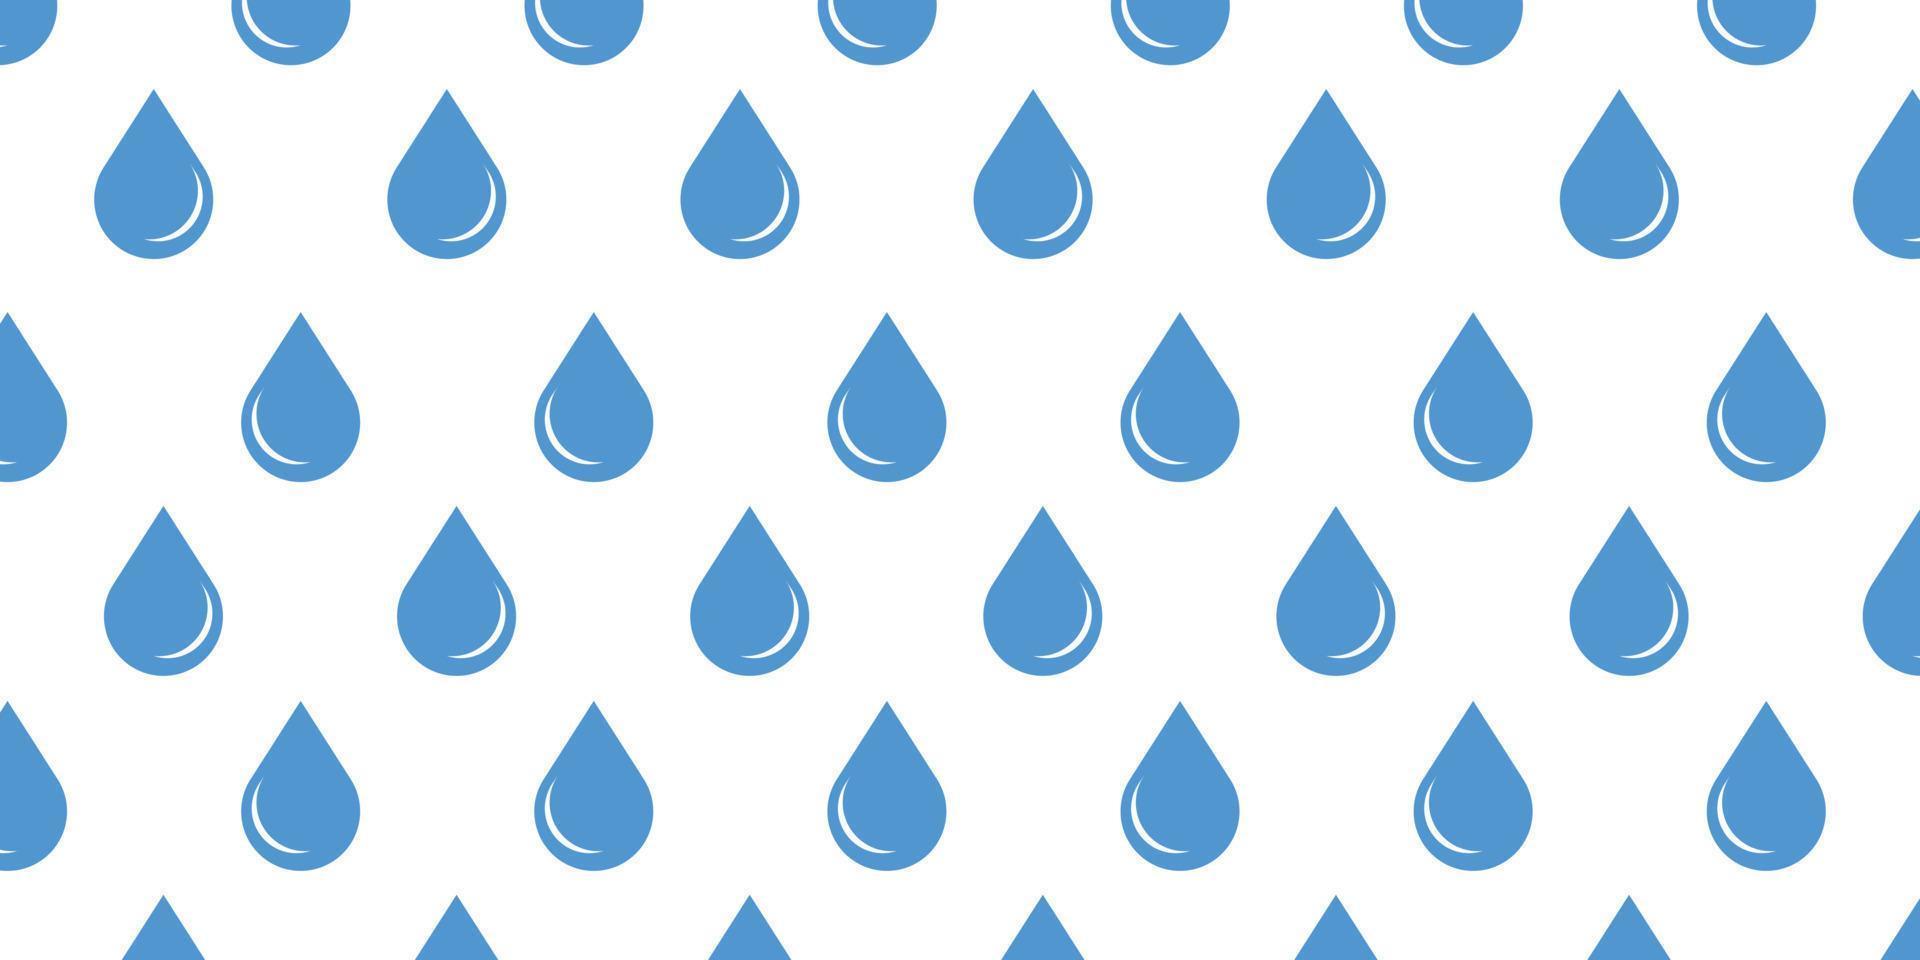 Blue water drop pattern background vector